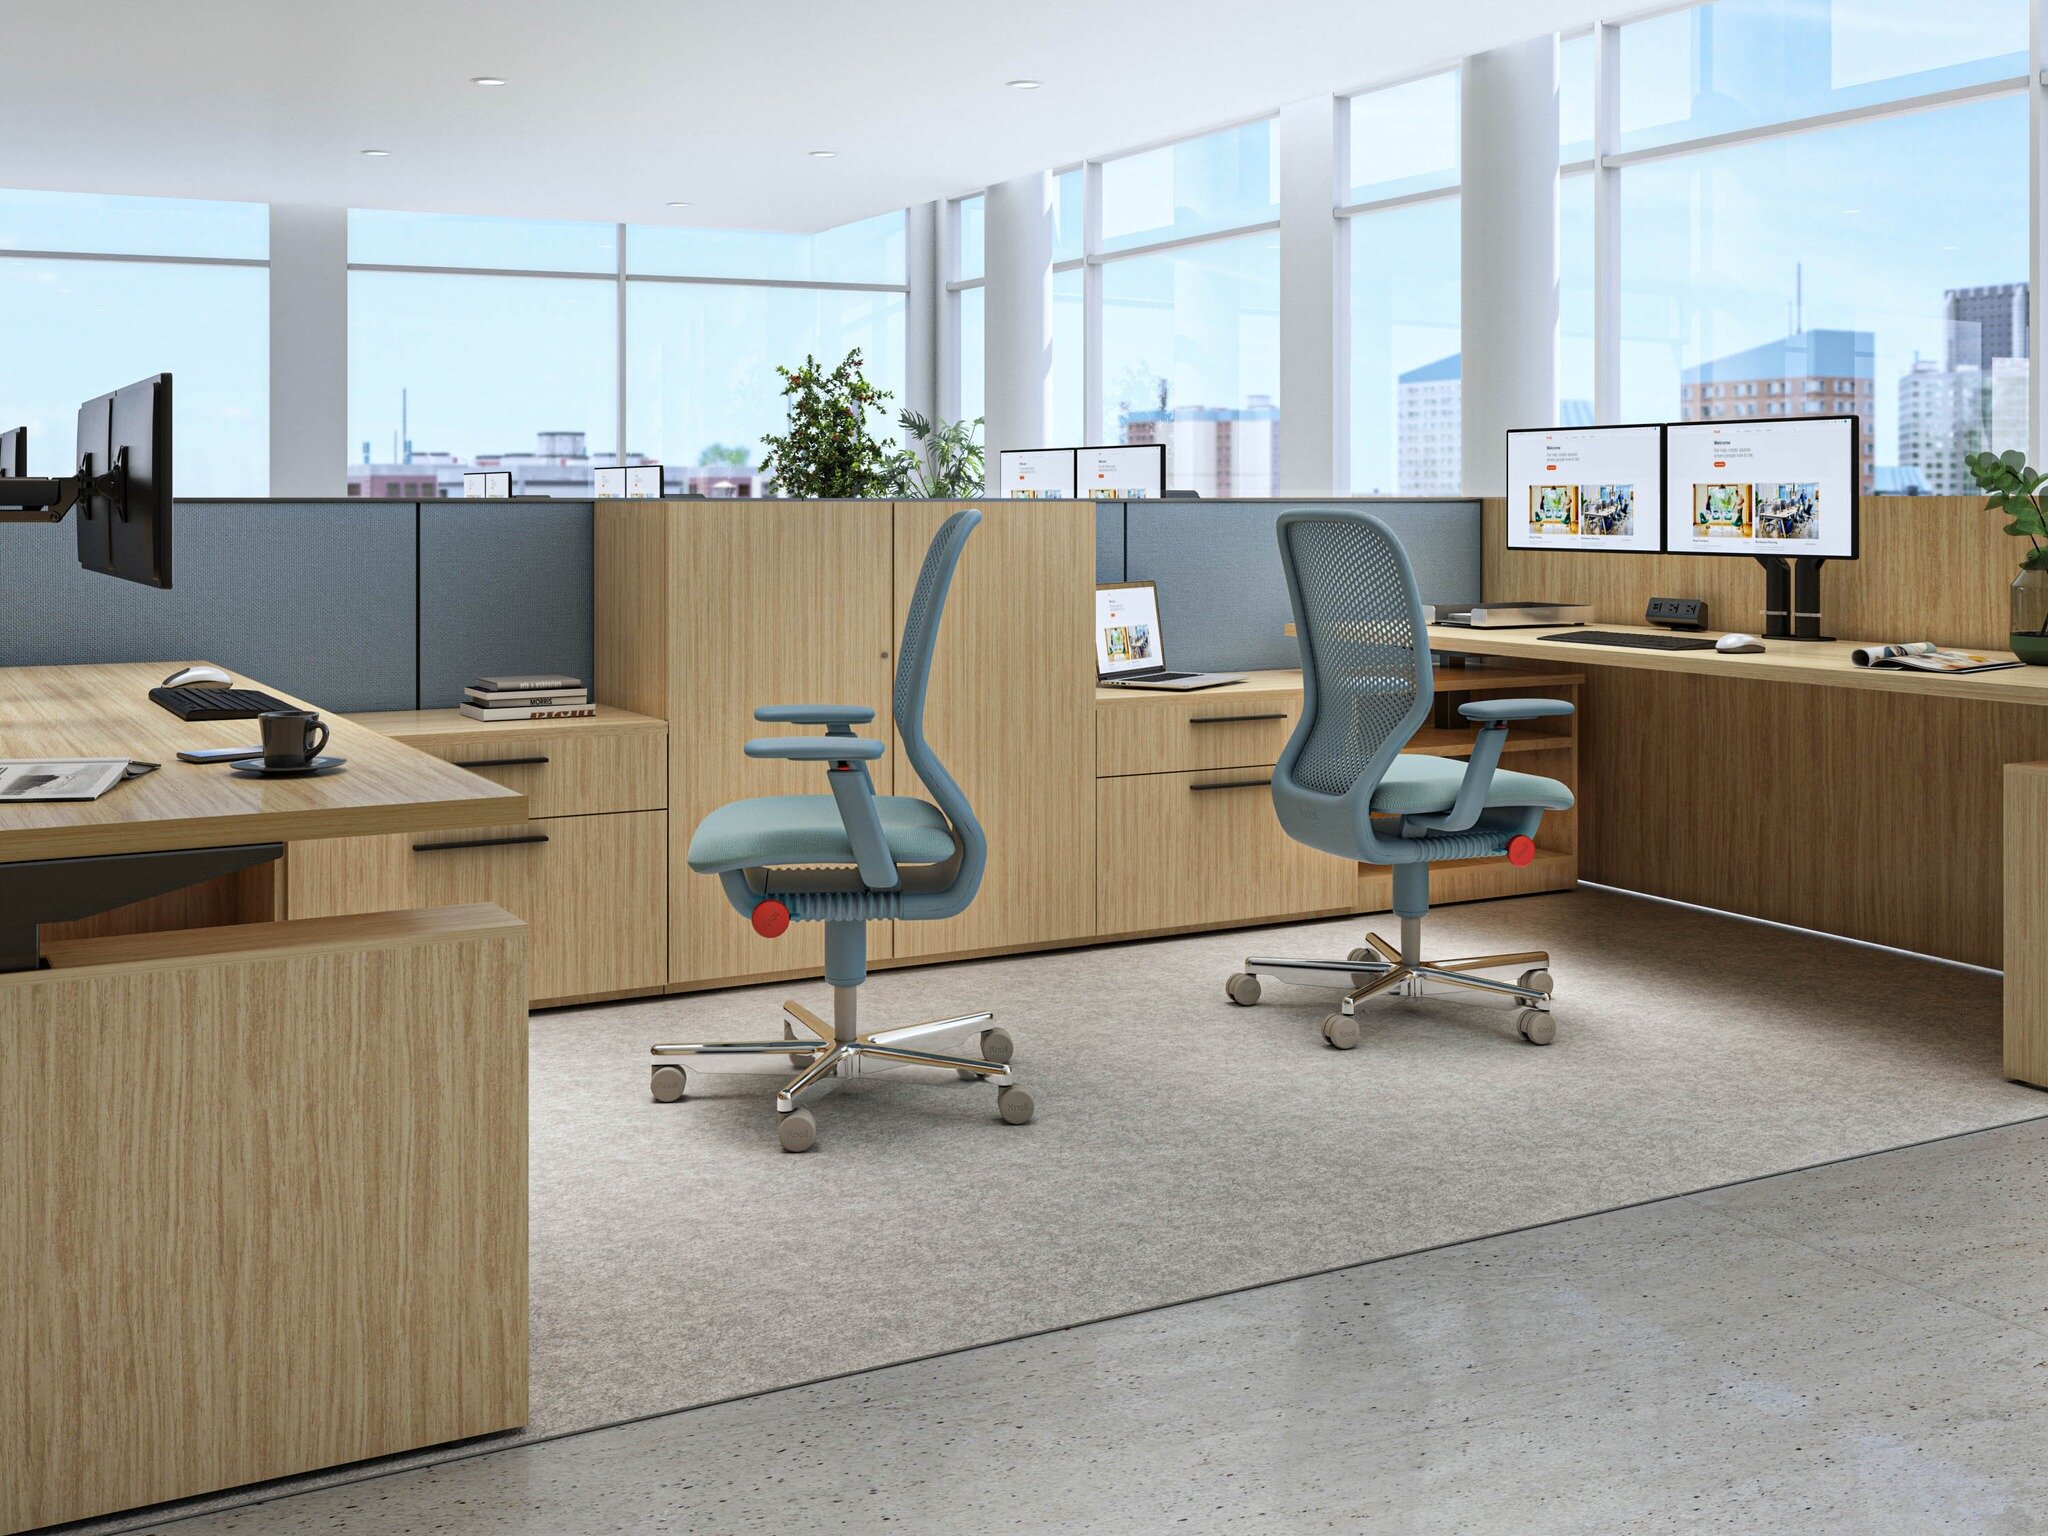 The Newson Task chair from @knoll will be arriving to our showroom any day now!

&quot;The first step to greatness is sitting down&quot;

#hubofficefurniture #officefurniture #commercialinteriors #commercialfurniture #okanagan #officefurniturekelowna